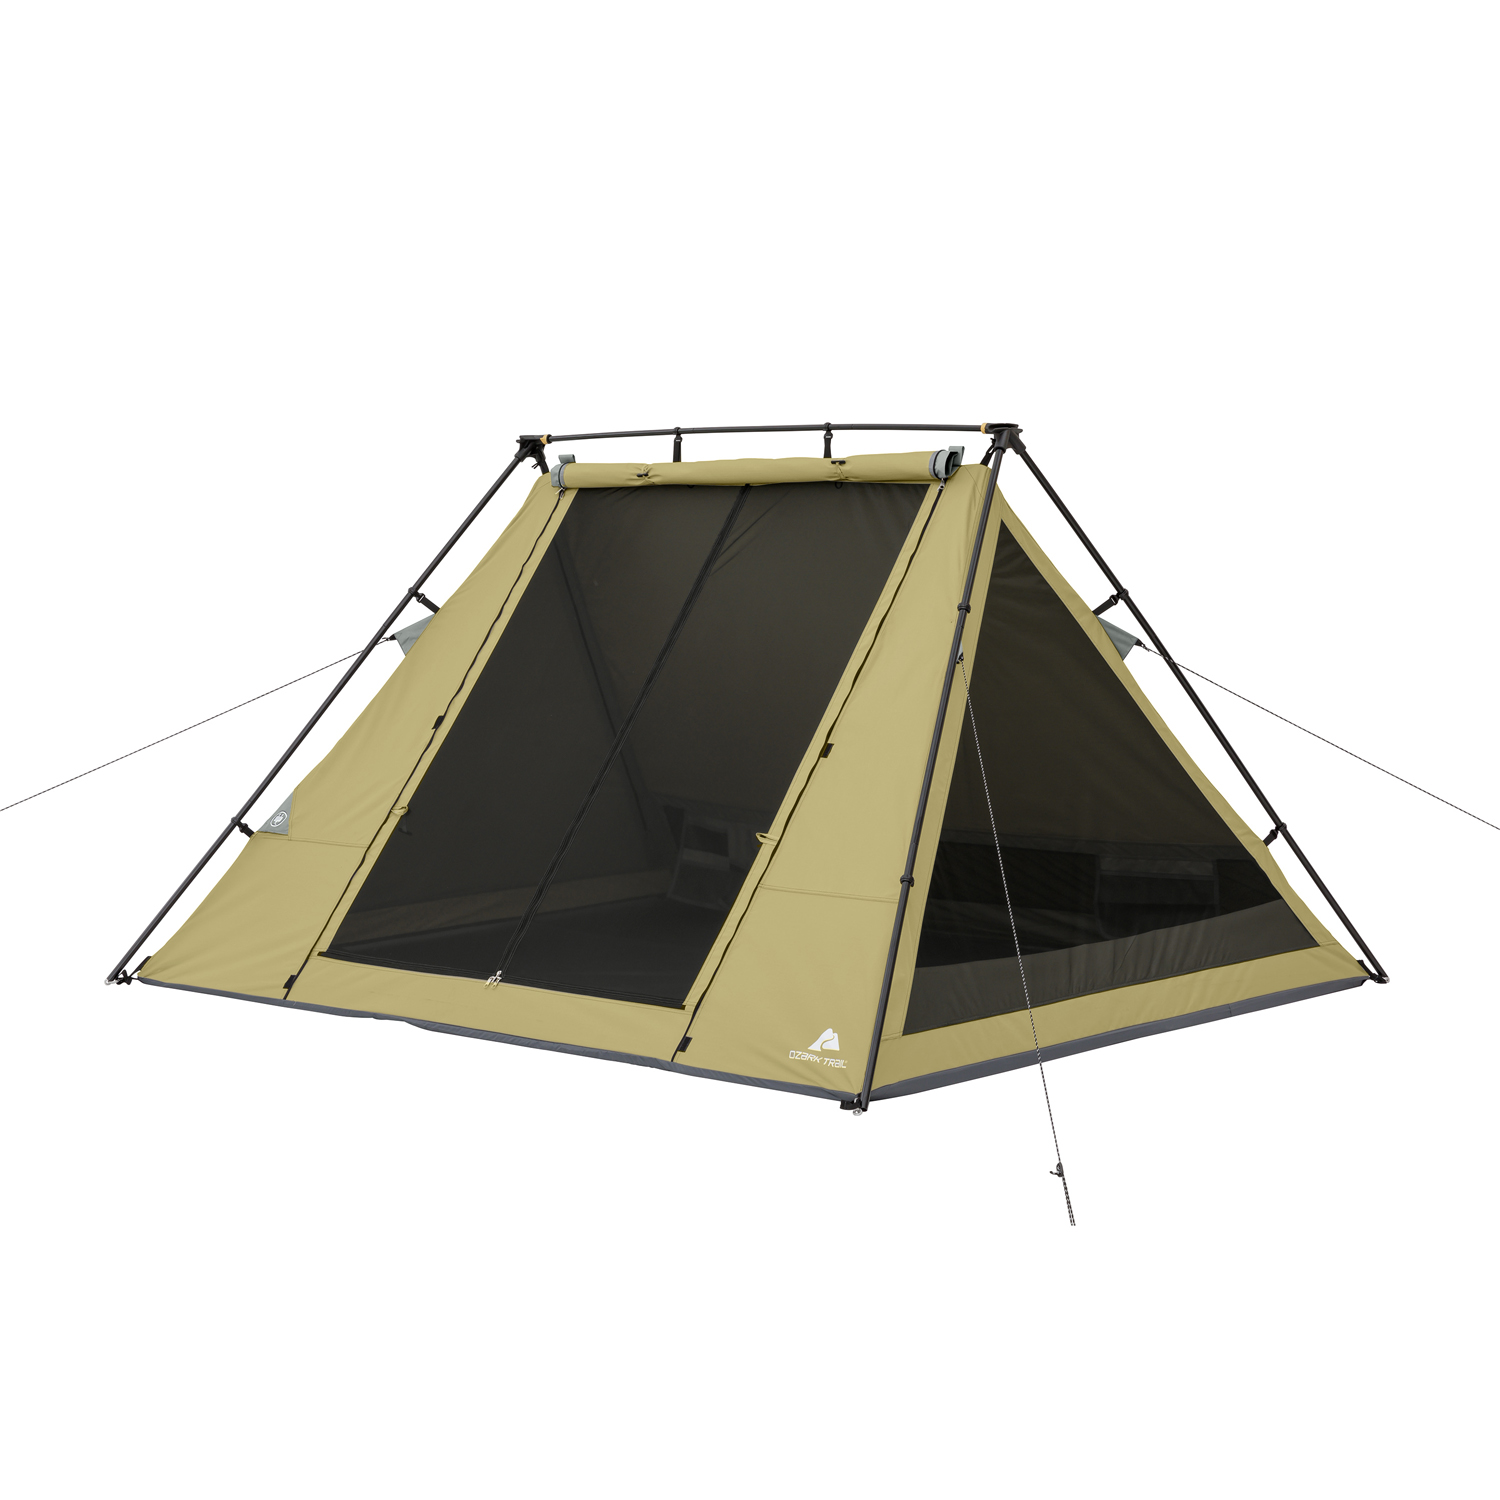 Ozark Trail 8’ x 7’ 4-Person A-Frame Tent with Awning - image 3 of 6